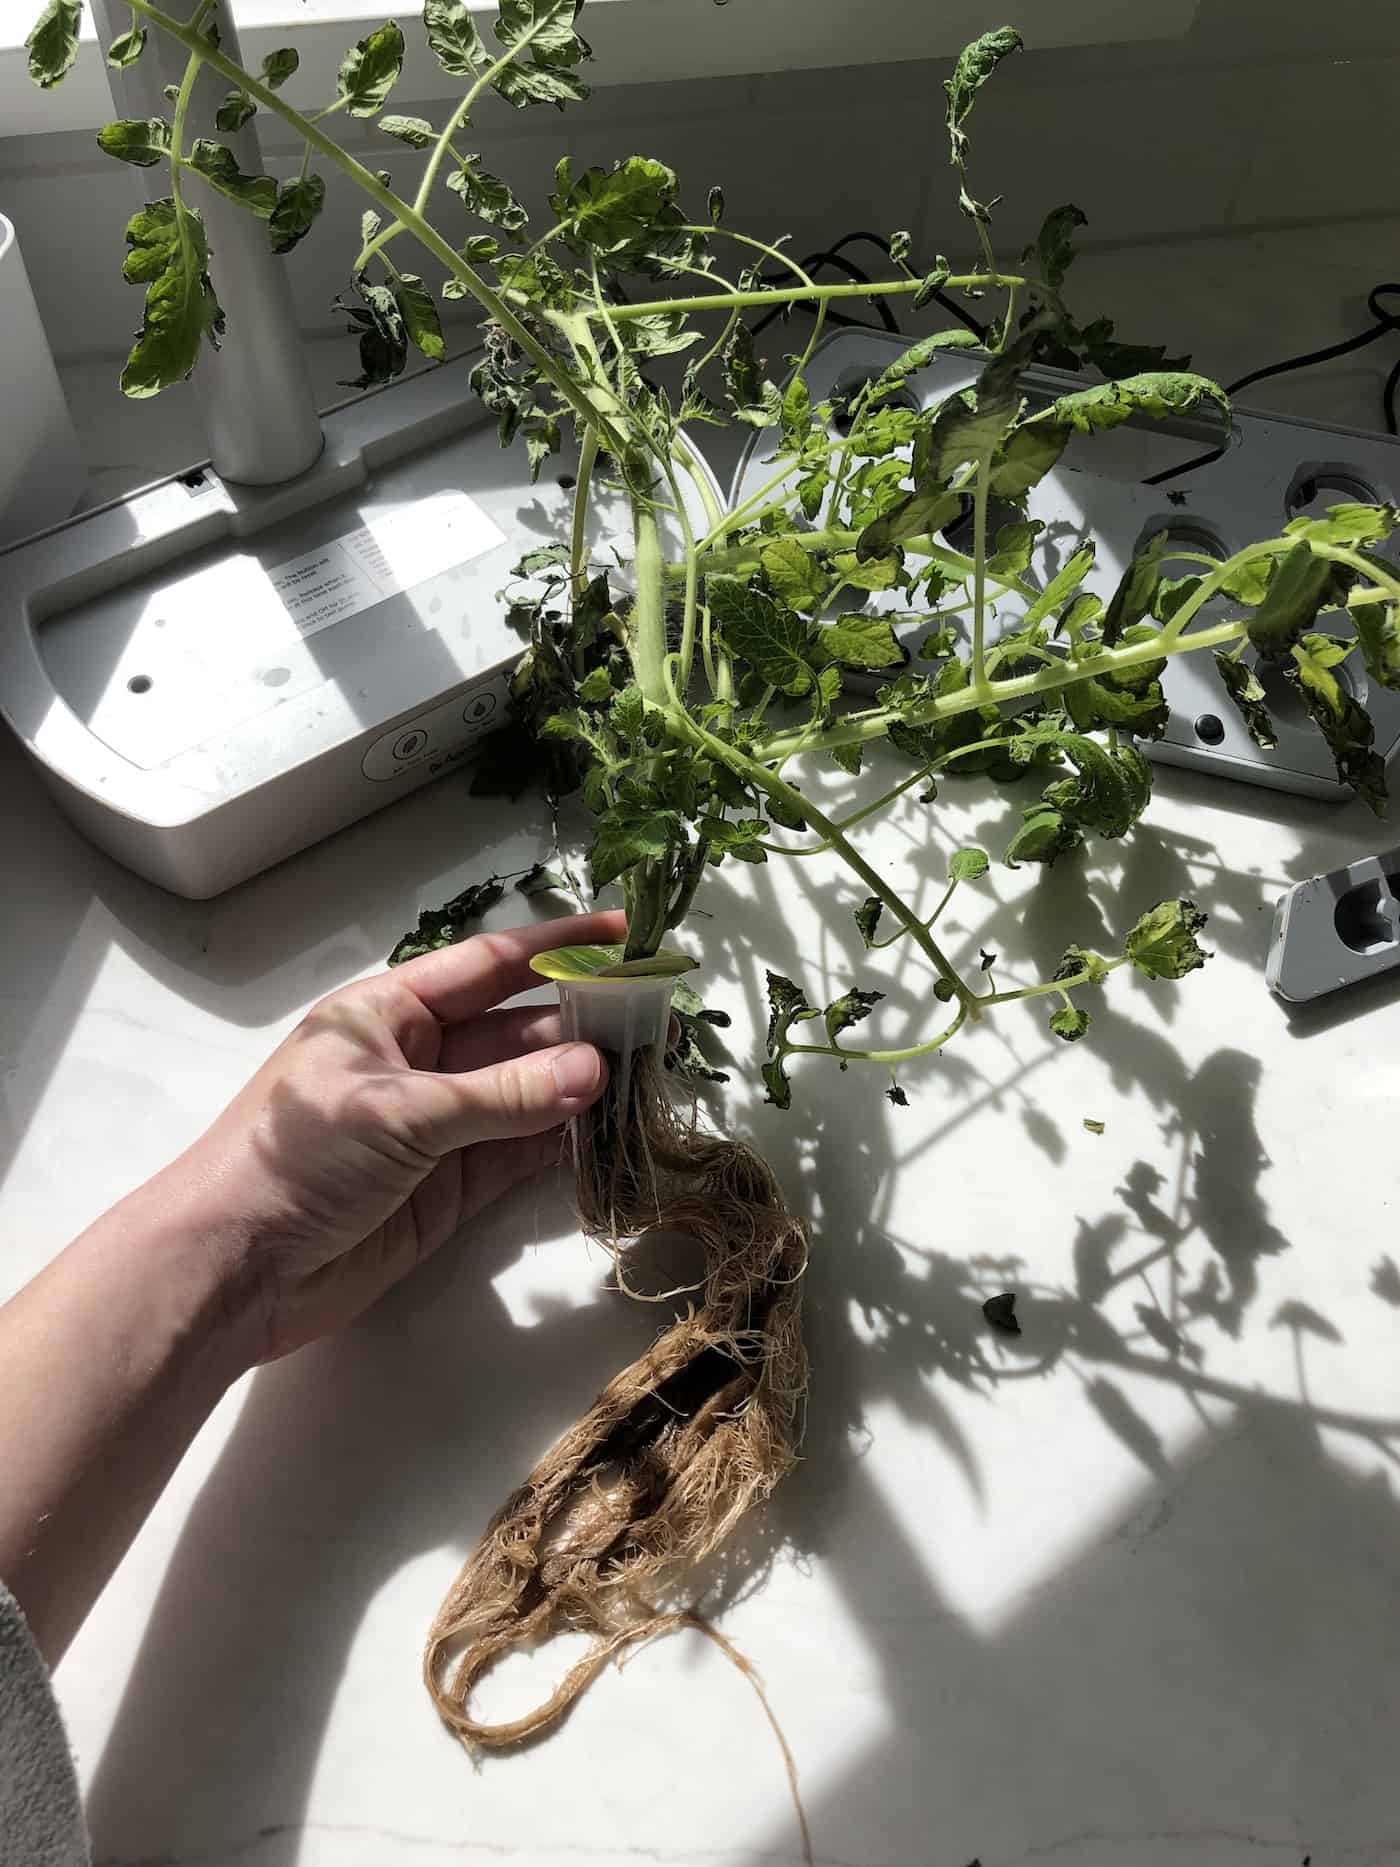 roots of tomato plant that was growing in aerogarden harvest